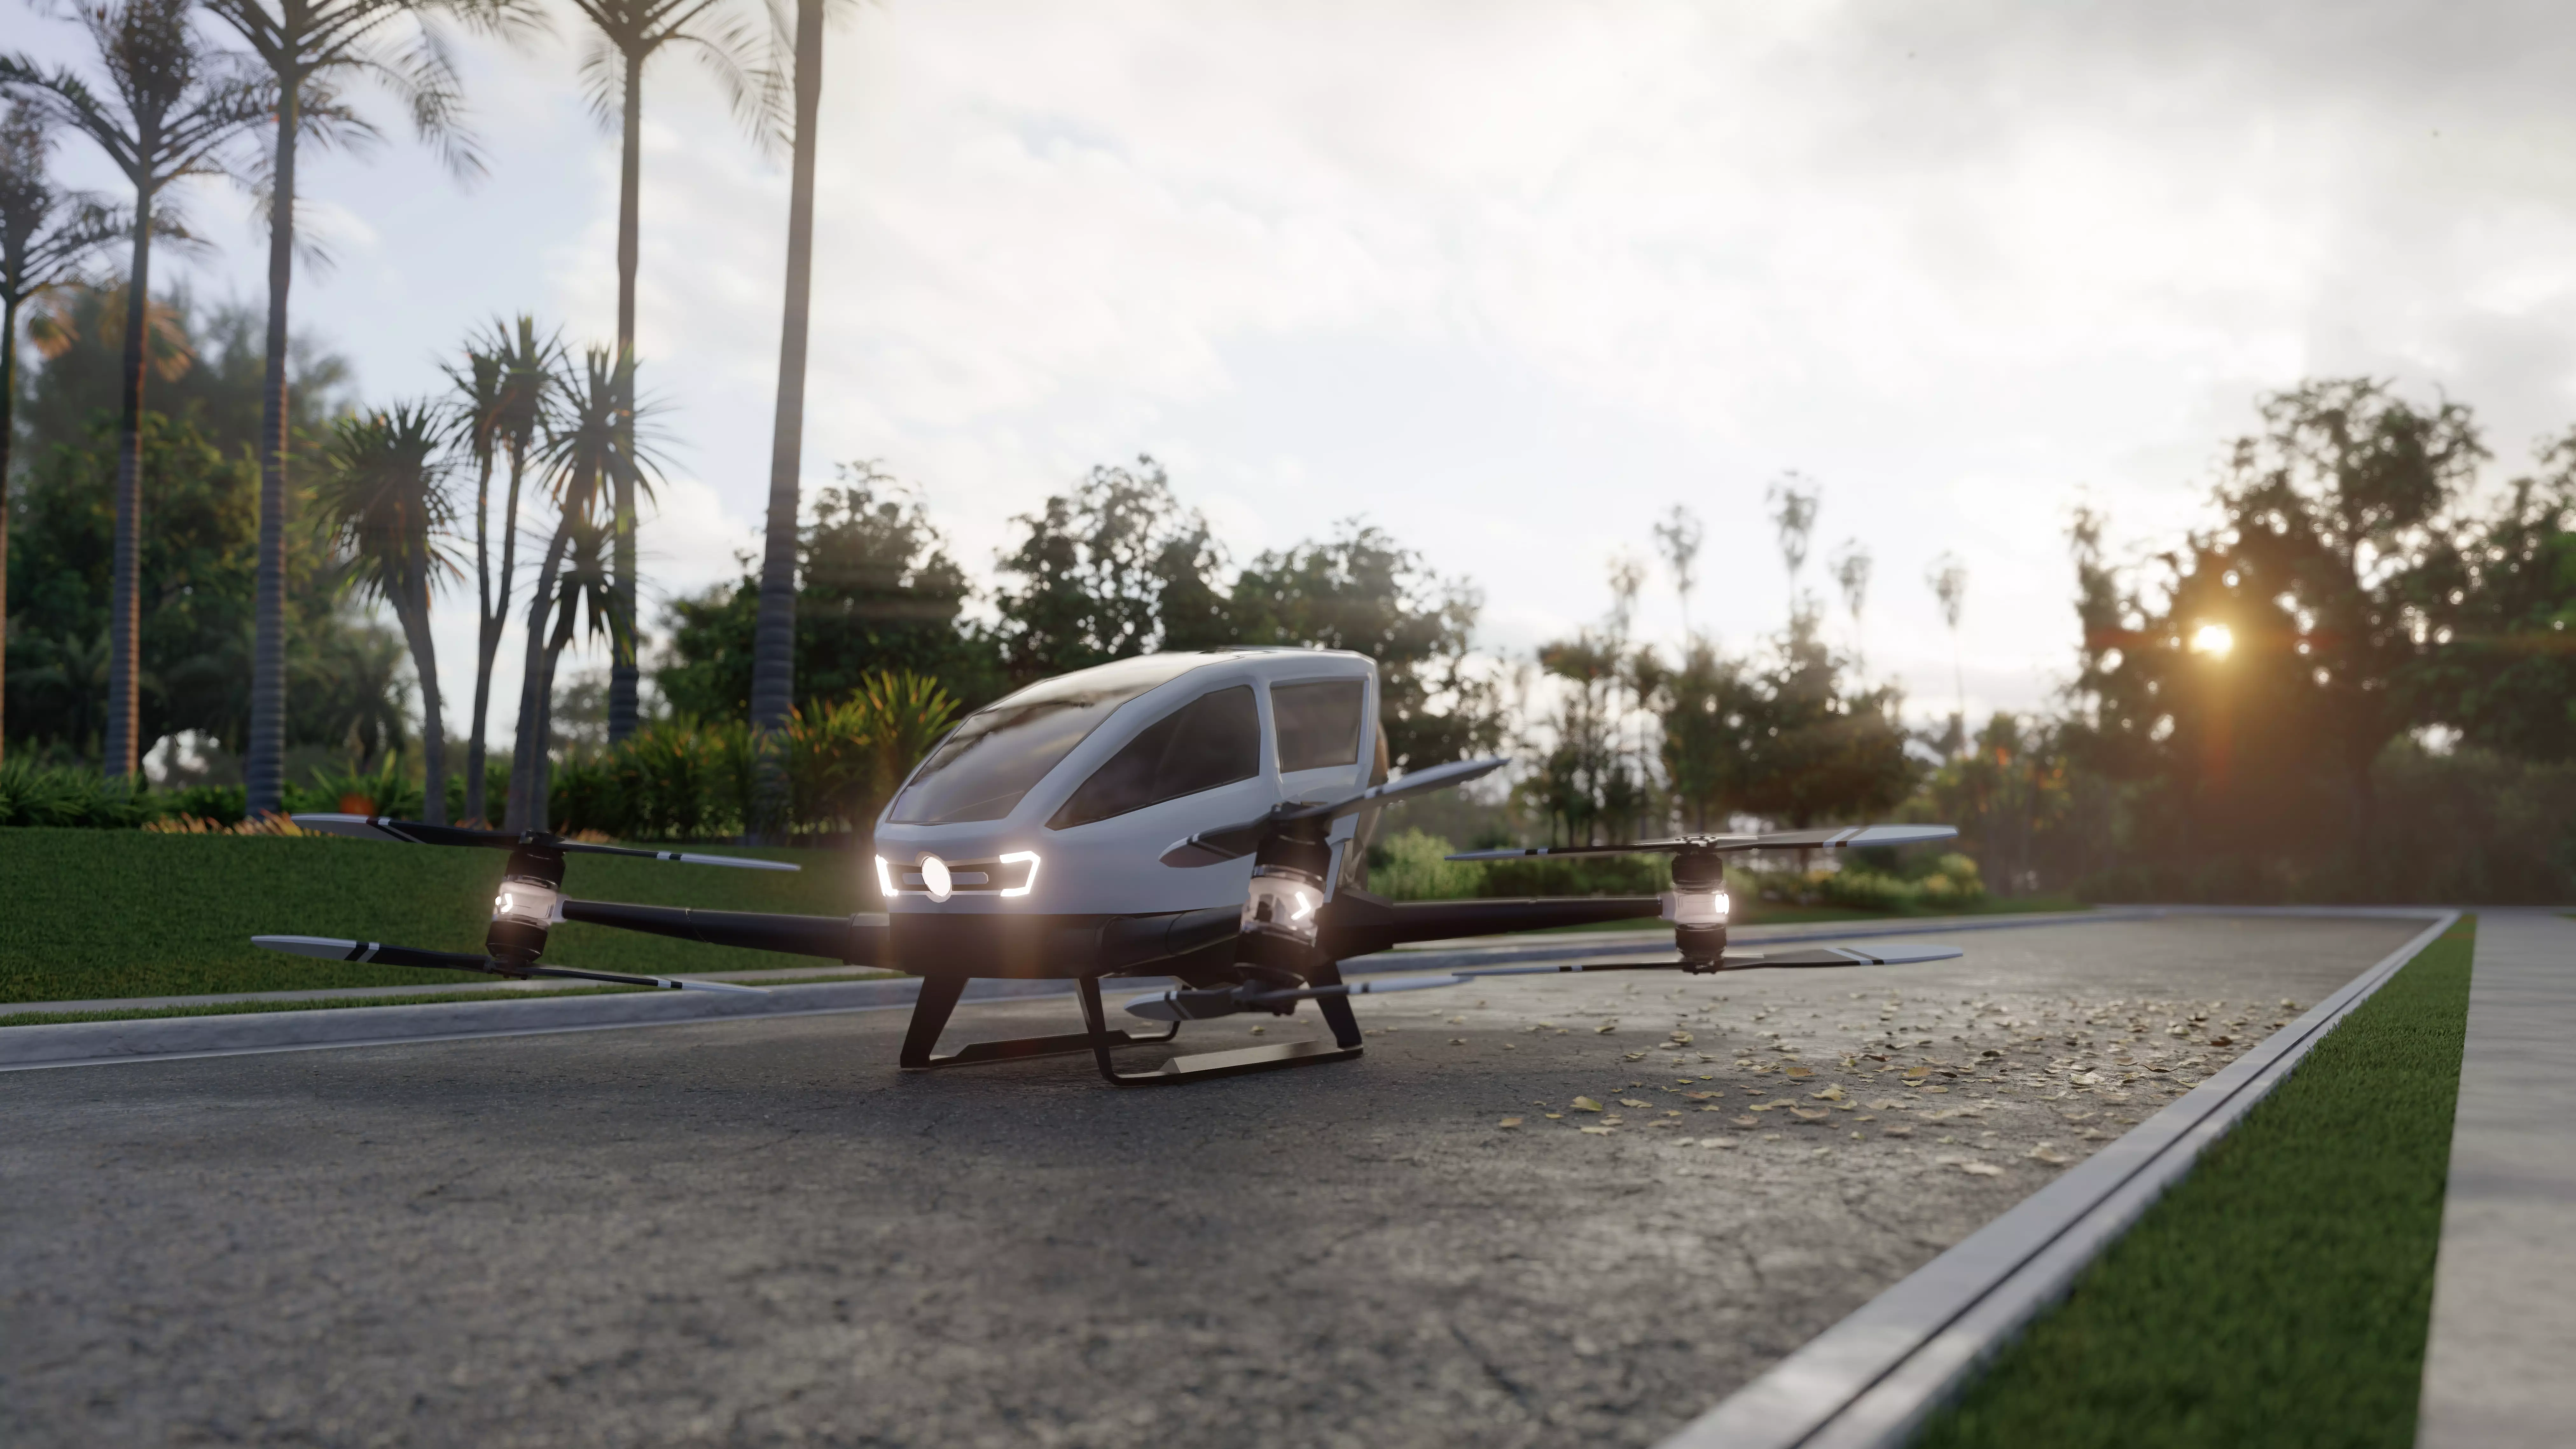 An unmanned passenger air taxi stands on the road waiting for a client. View of an unmanned aerial passenger vehicle. 3D Rendering.